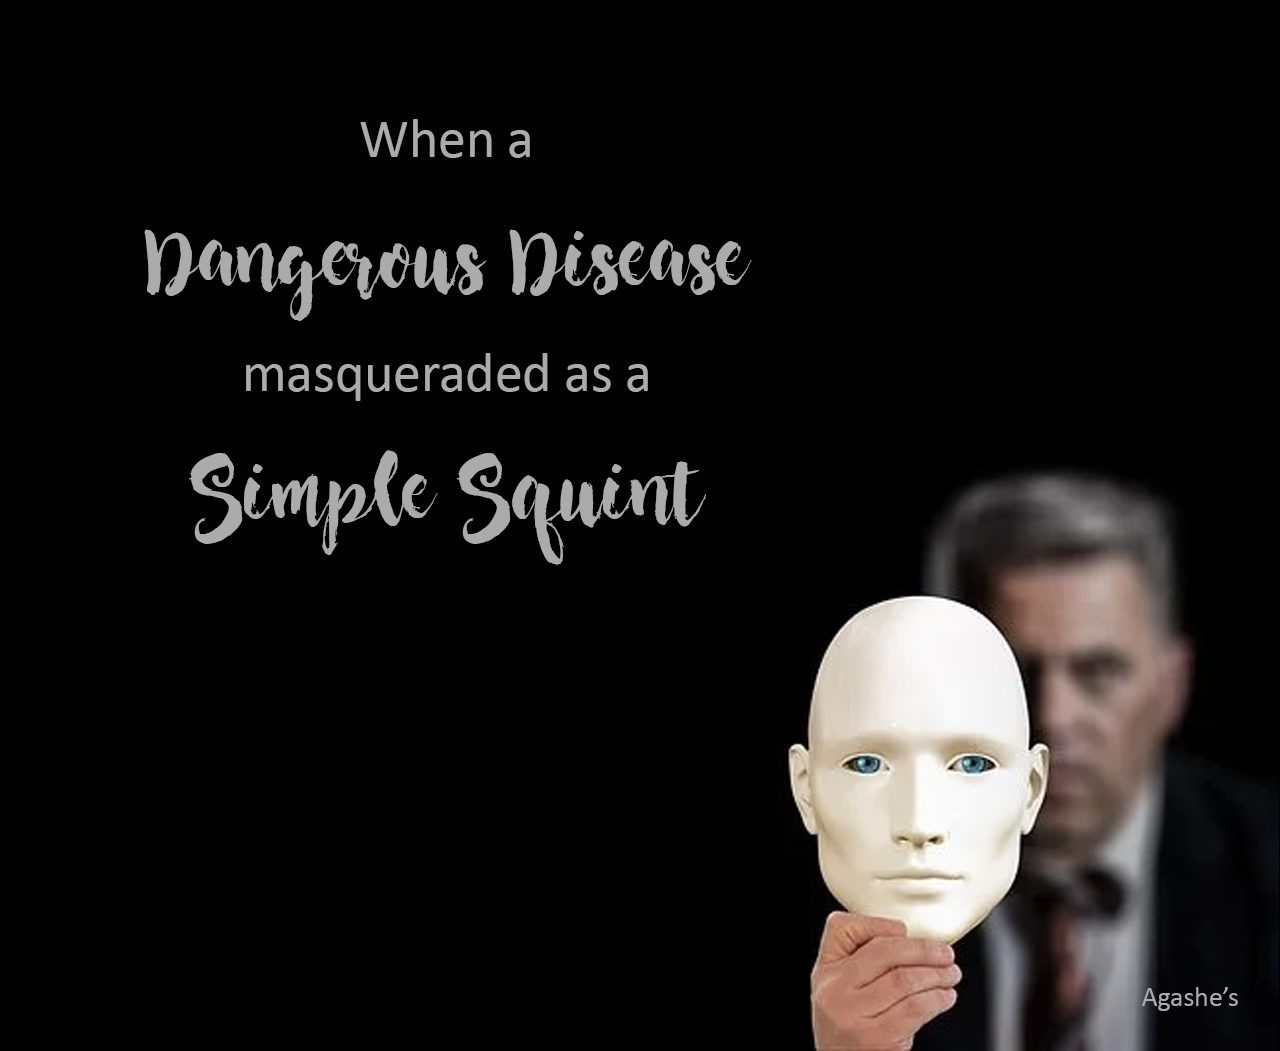 You are currently viewing When a Dangerous Disease masqueraded as a Simple Squint